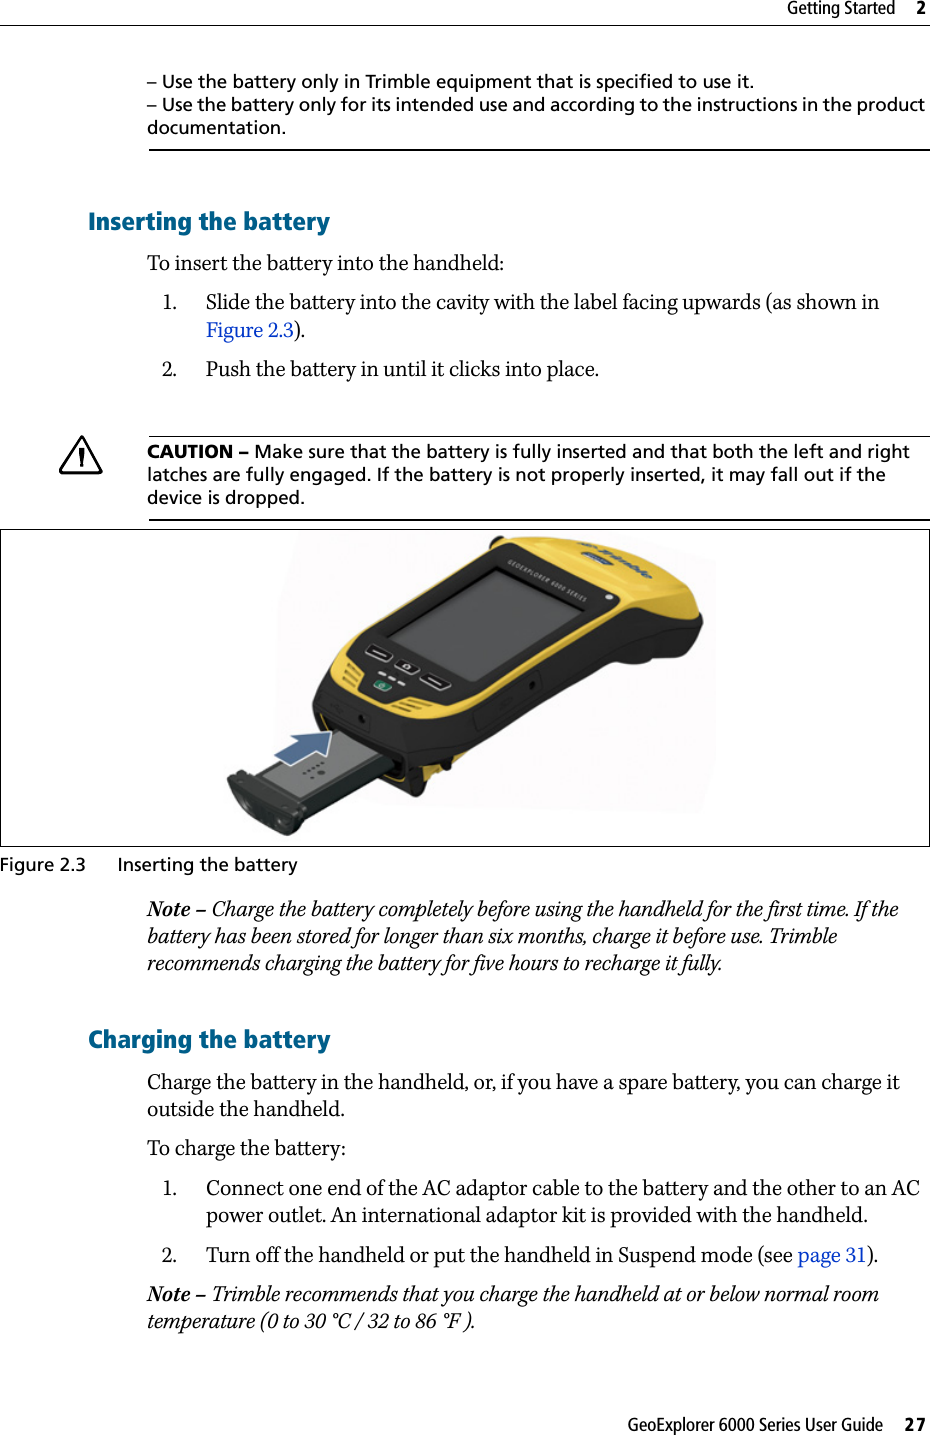 GeoExplorer 6000 Series User Guide     27Getting Started     2– Use the battery only in Trimble equipment that is specified to use it.– Use the battery only for its intended use and according to the instructions in the product documentation.Inserting the batteryTo insert the battery into the handheld:1. Slide the battery into the cavity with the label facing upwards (as shown in Figure 2.3).2. Push the battery in until it clicks into place.CCAUTION – Make sure that the battery is fully inserted and that both the left and right latches are fully engaged. If the battery is not properly inserted, it may fall out if the device is dropped.  Figure 2.3 Inserting the batteryNote – Charge the battery completely before using the handheld for the first time. If the battery has been stored for longer than six months, charge it before use. Trimble recommends charging the battery for five hours to recharge it fully.Charging the batteryCharge the battery in the handheld, or, if you have a spare battery, you can charge it outside the handheld.To charge the battery: 1. Connect one end of the AC adaptor cable to the battery and the other to an AC power outlet. An international adaptor kit is provided with the handheld. 2. Turn off the handheld or put the handheld in Suspend mode (see page 31). Note – Trimble recommends that you charge the handheld at or below normal room temperature (0 to 30 °C / 32 to 86 °F ).